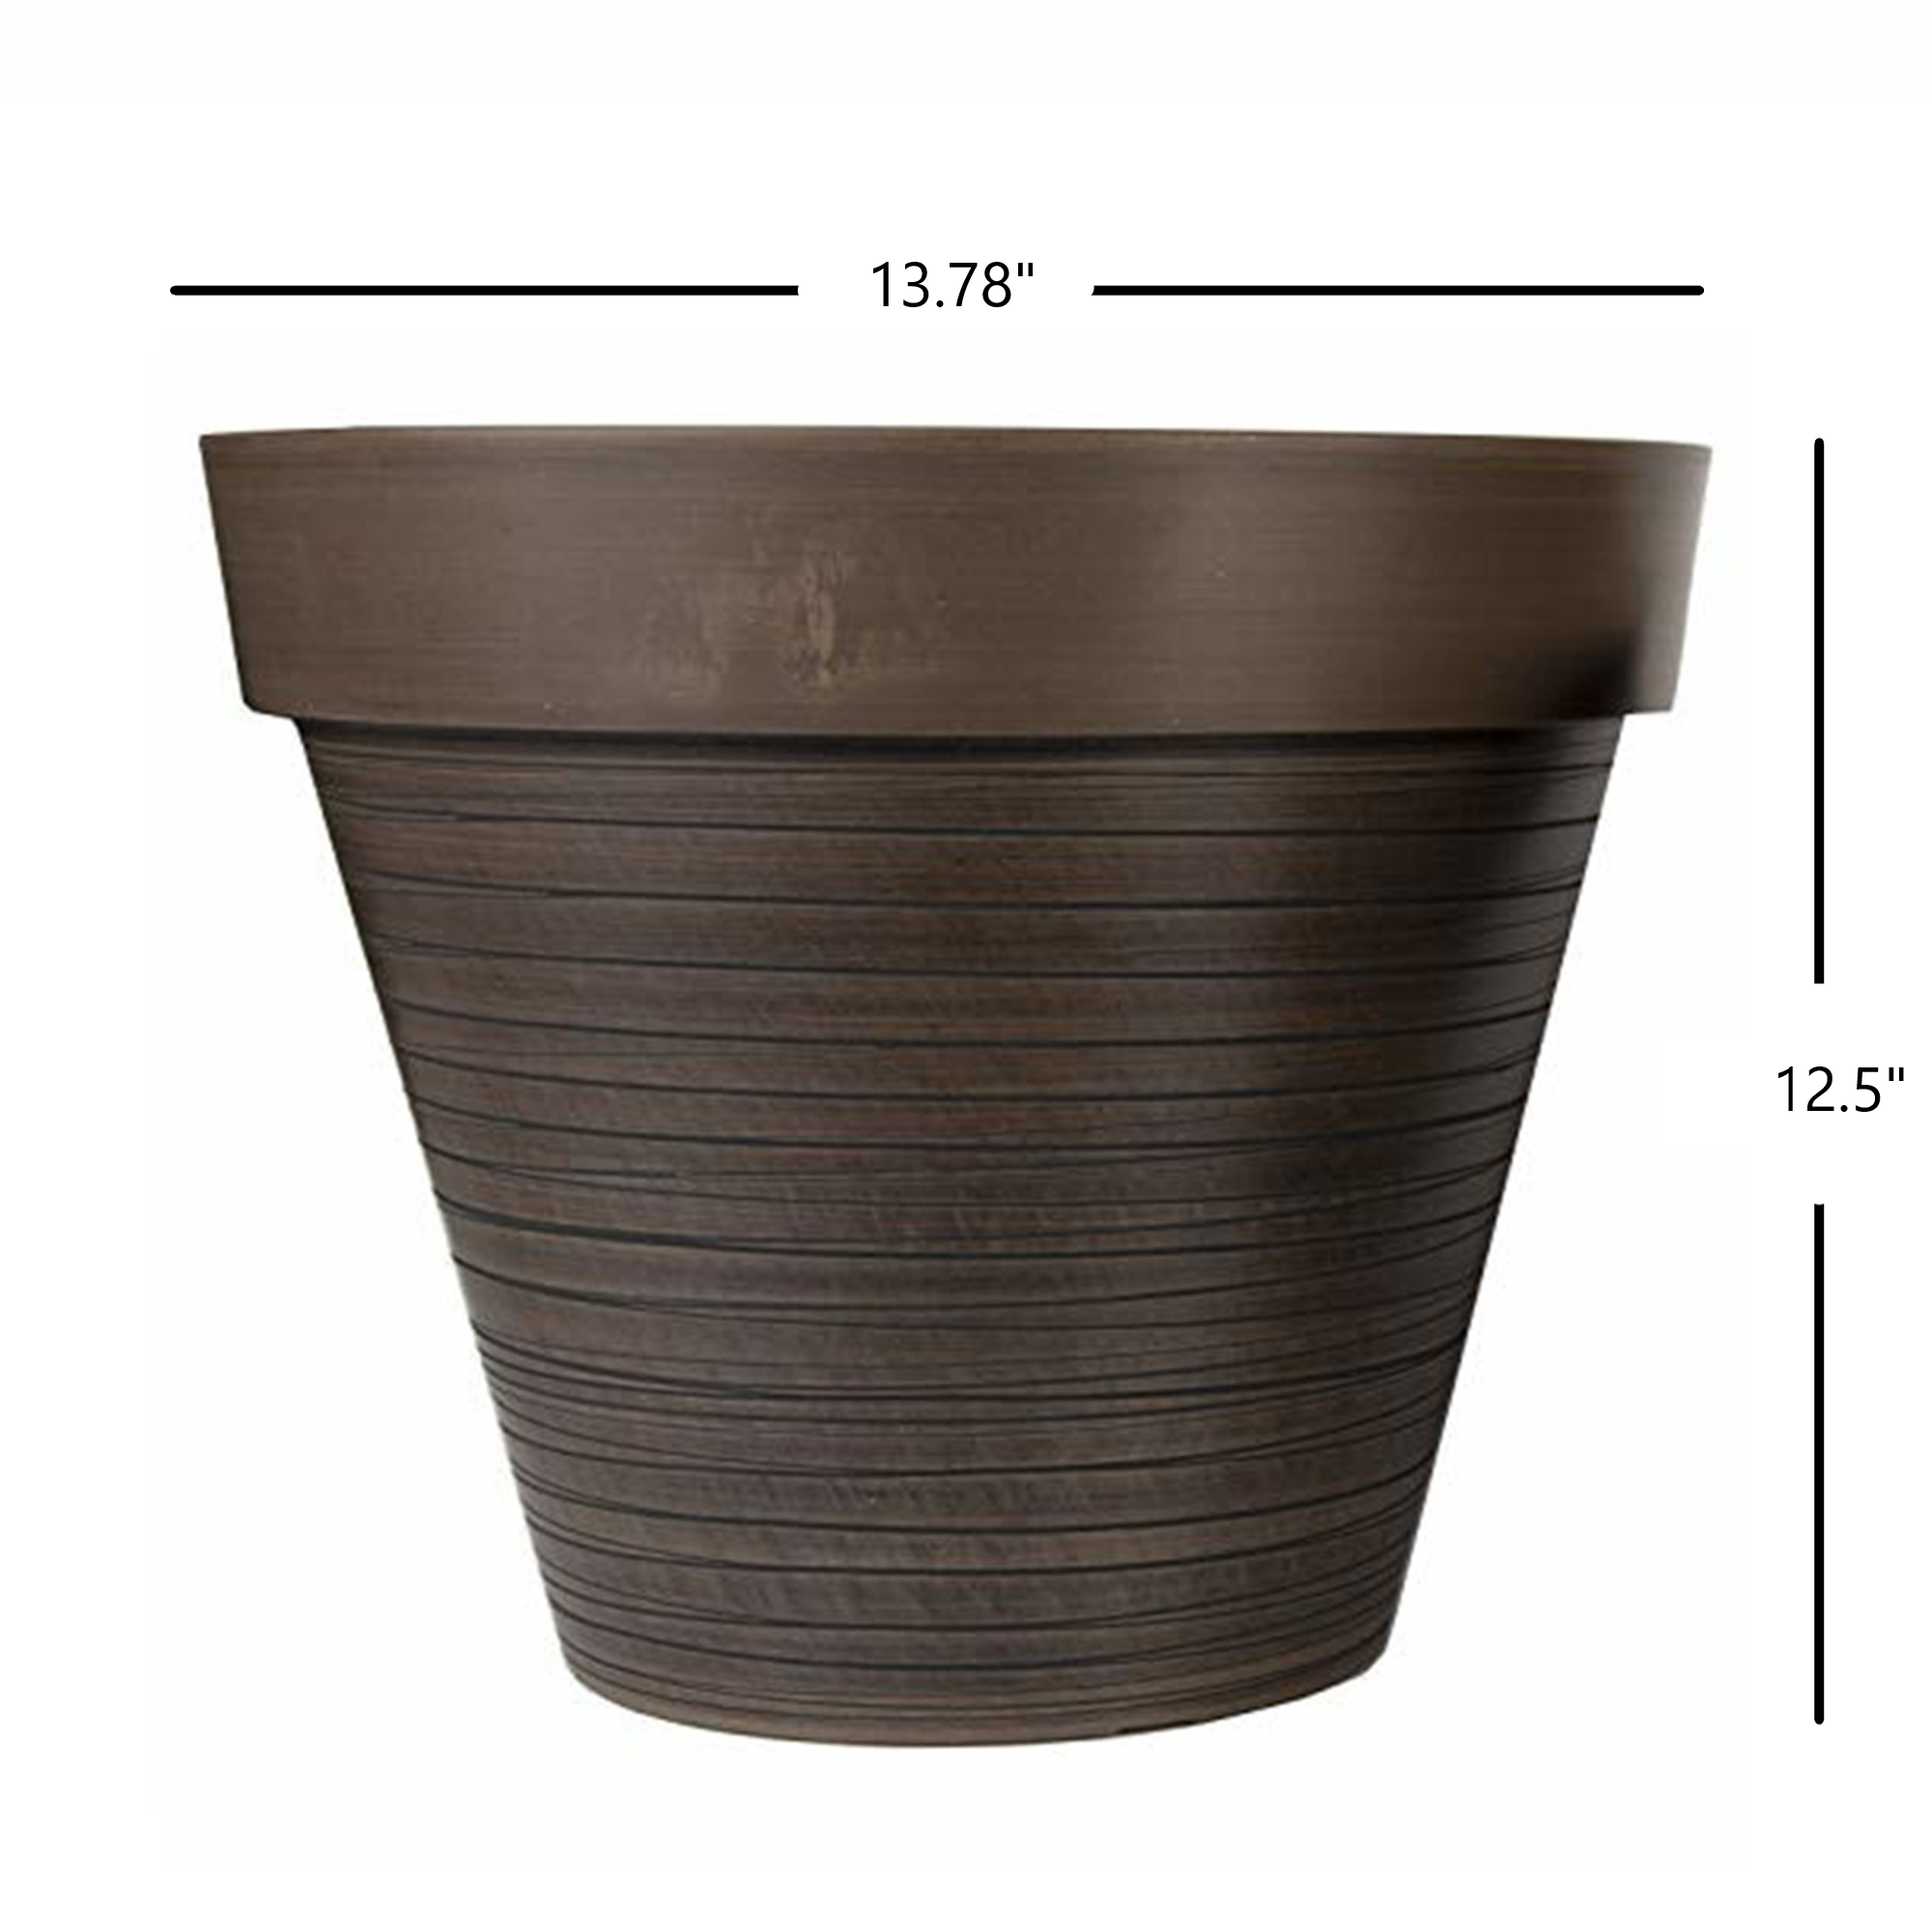 Gardener's Select 14 Carved Finish Planter w/ White Lines, Wide Rim, Chocolate